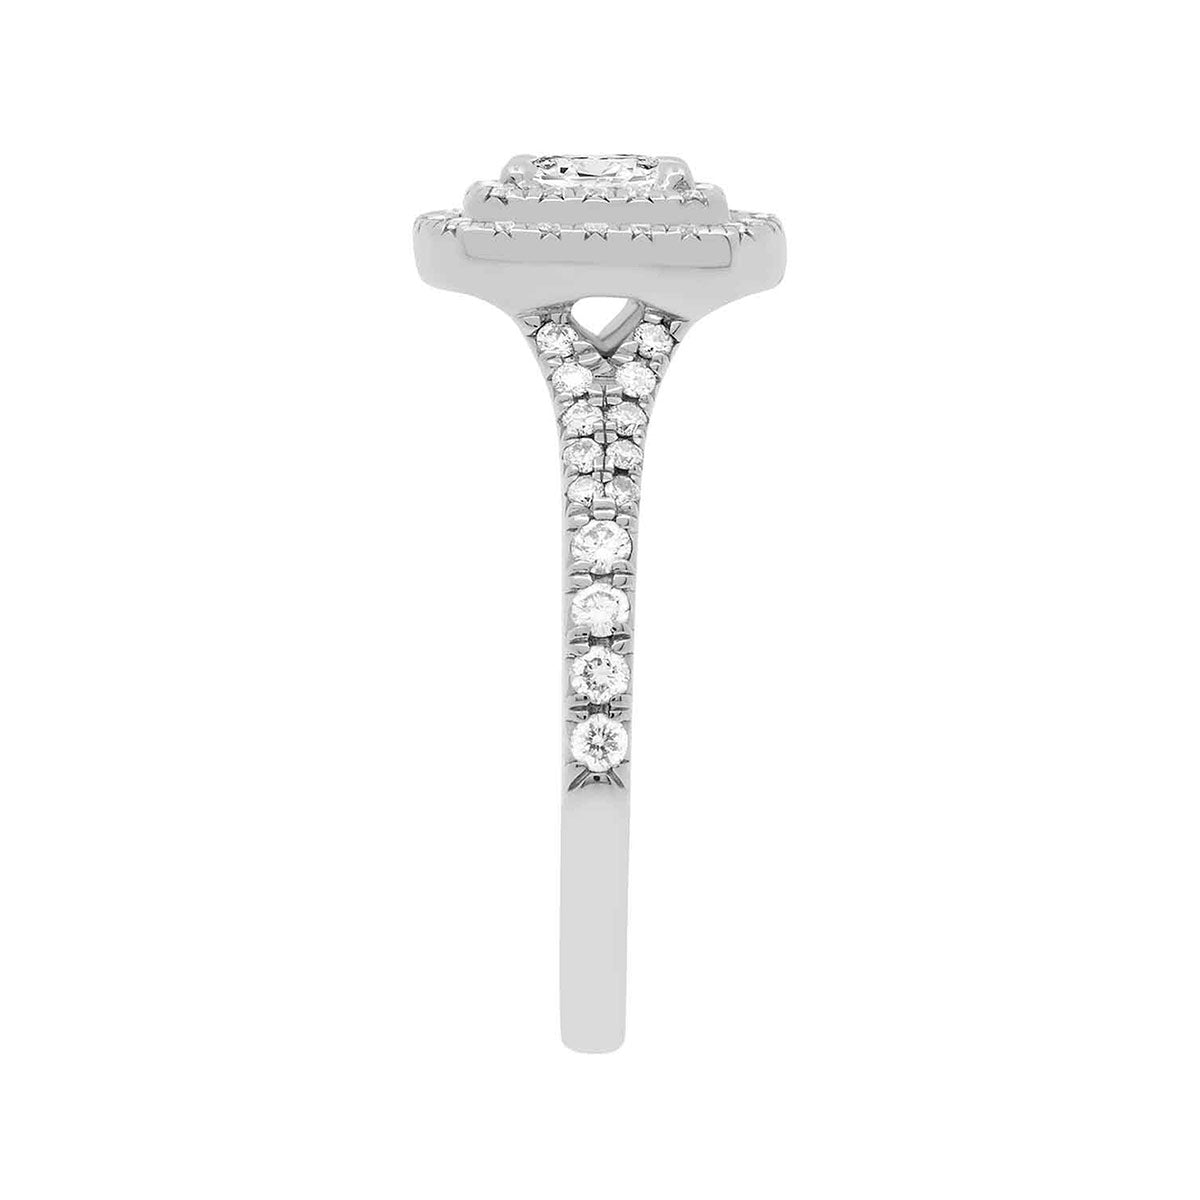 Double Halo Cushion Cut Diamond Ring in white gold from a side angle view